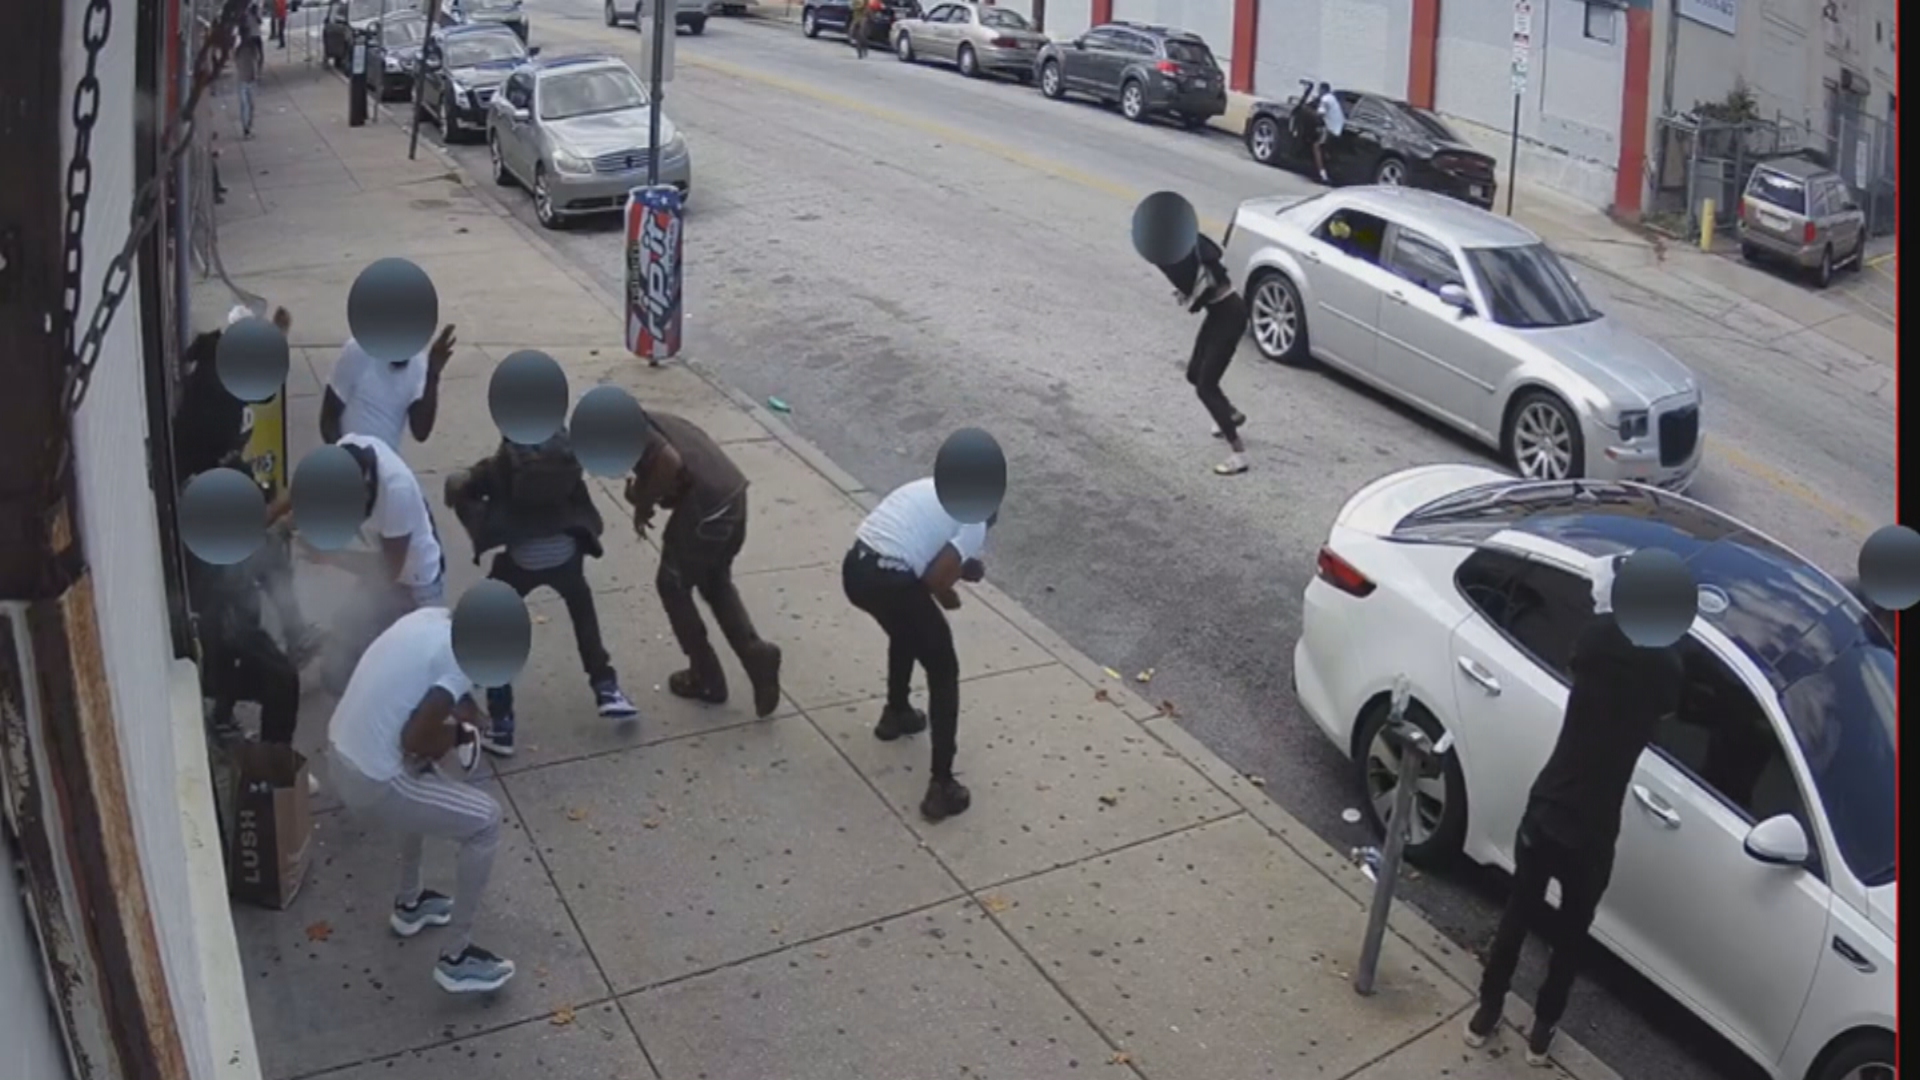 WATCH: Surveillance Video Catches Olney Drive-By Shooting That Killed 1, Injured 5